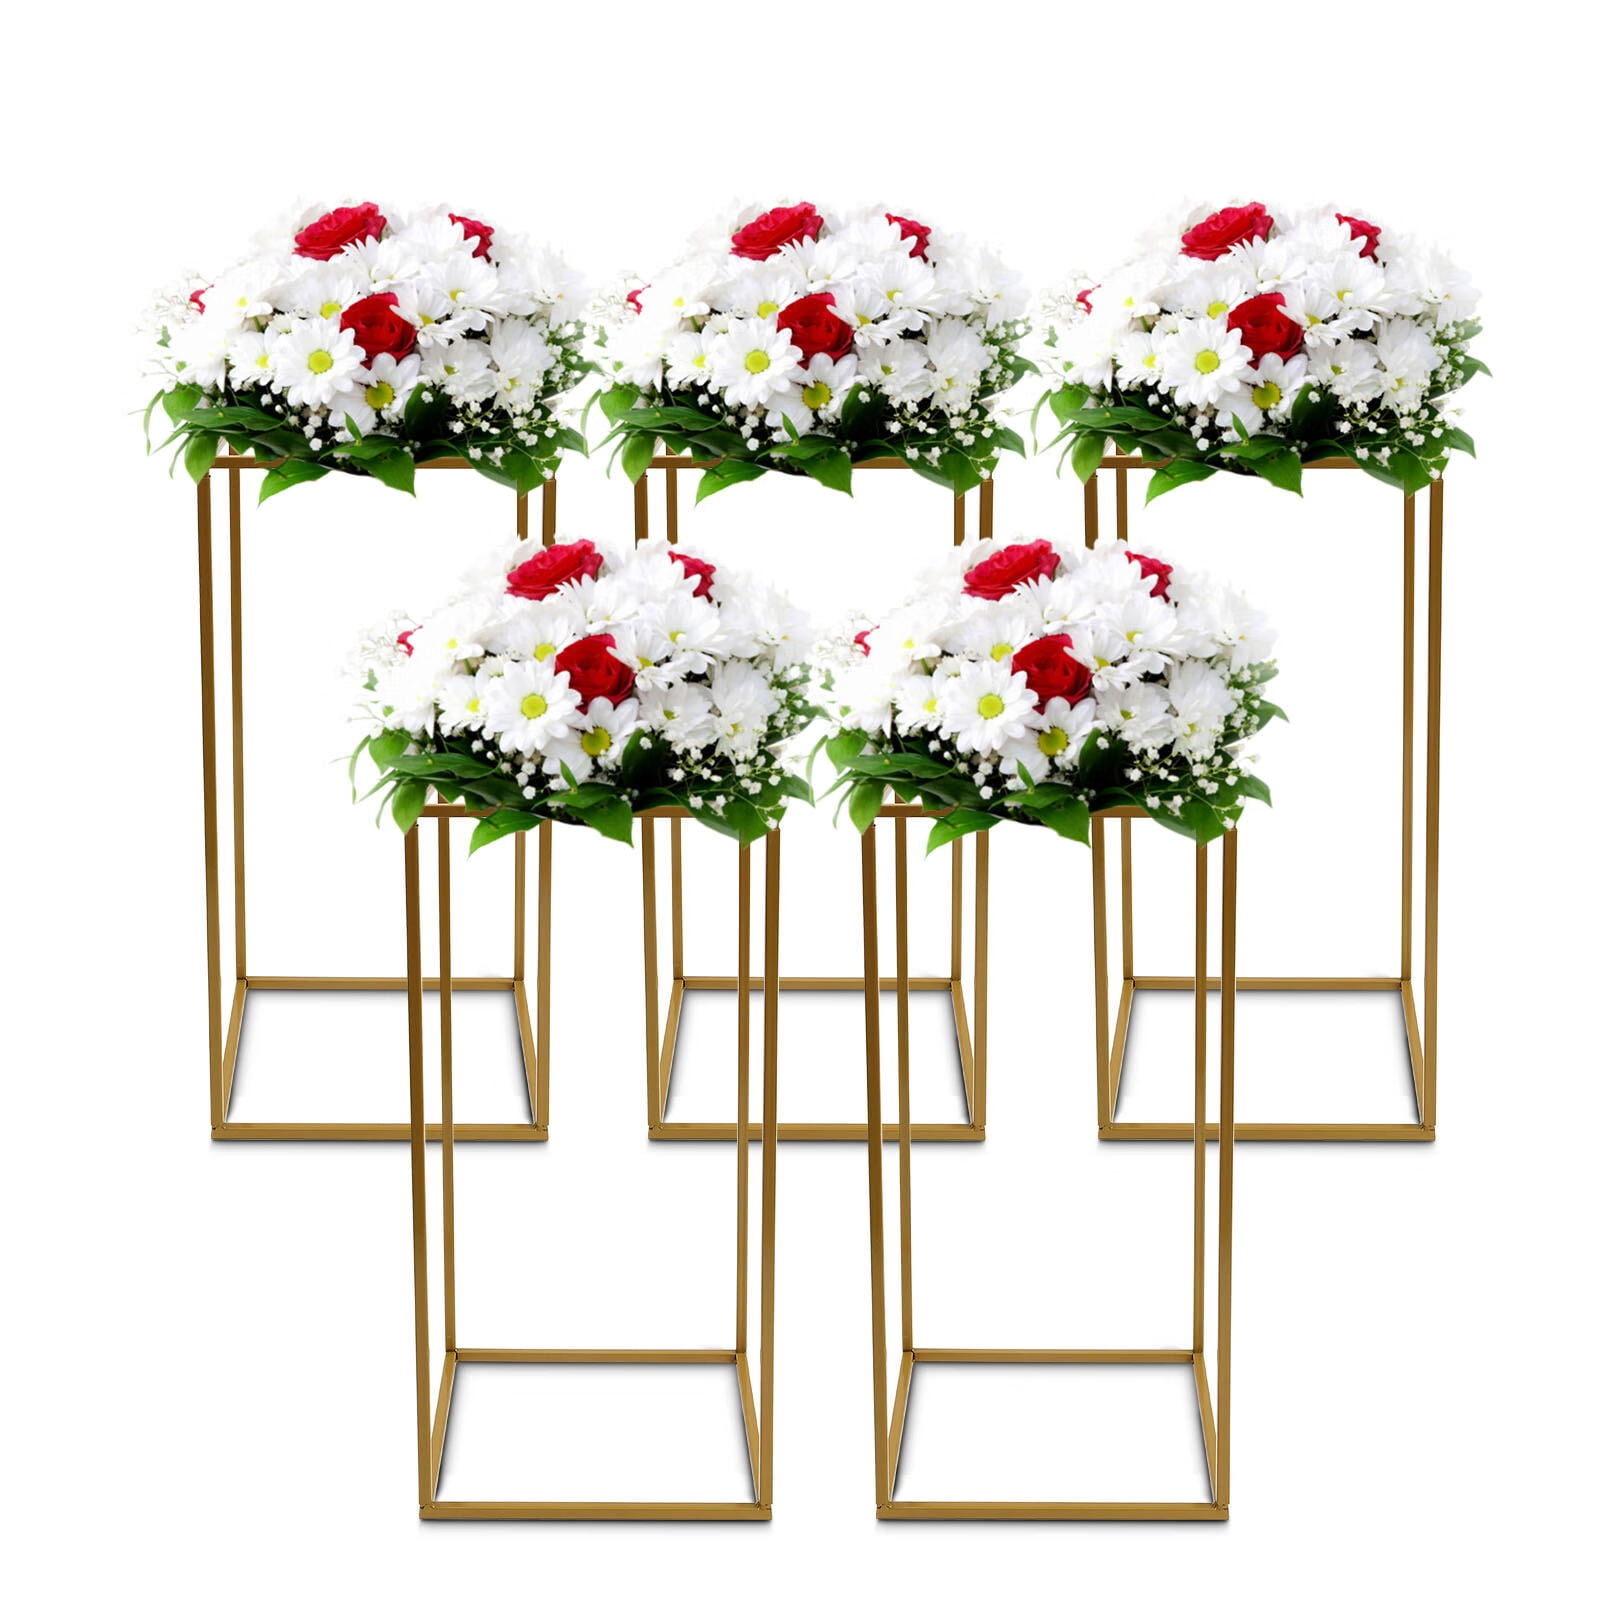 5Pack Wedding Flower Stands Plants Display DIY Room H-shaped Decro Steel  Tube 5 Pack Wedding Rack Backdrop Stand White Square Frame Flower Balloon